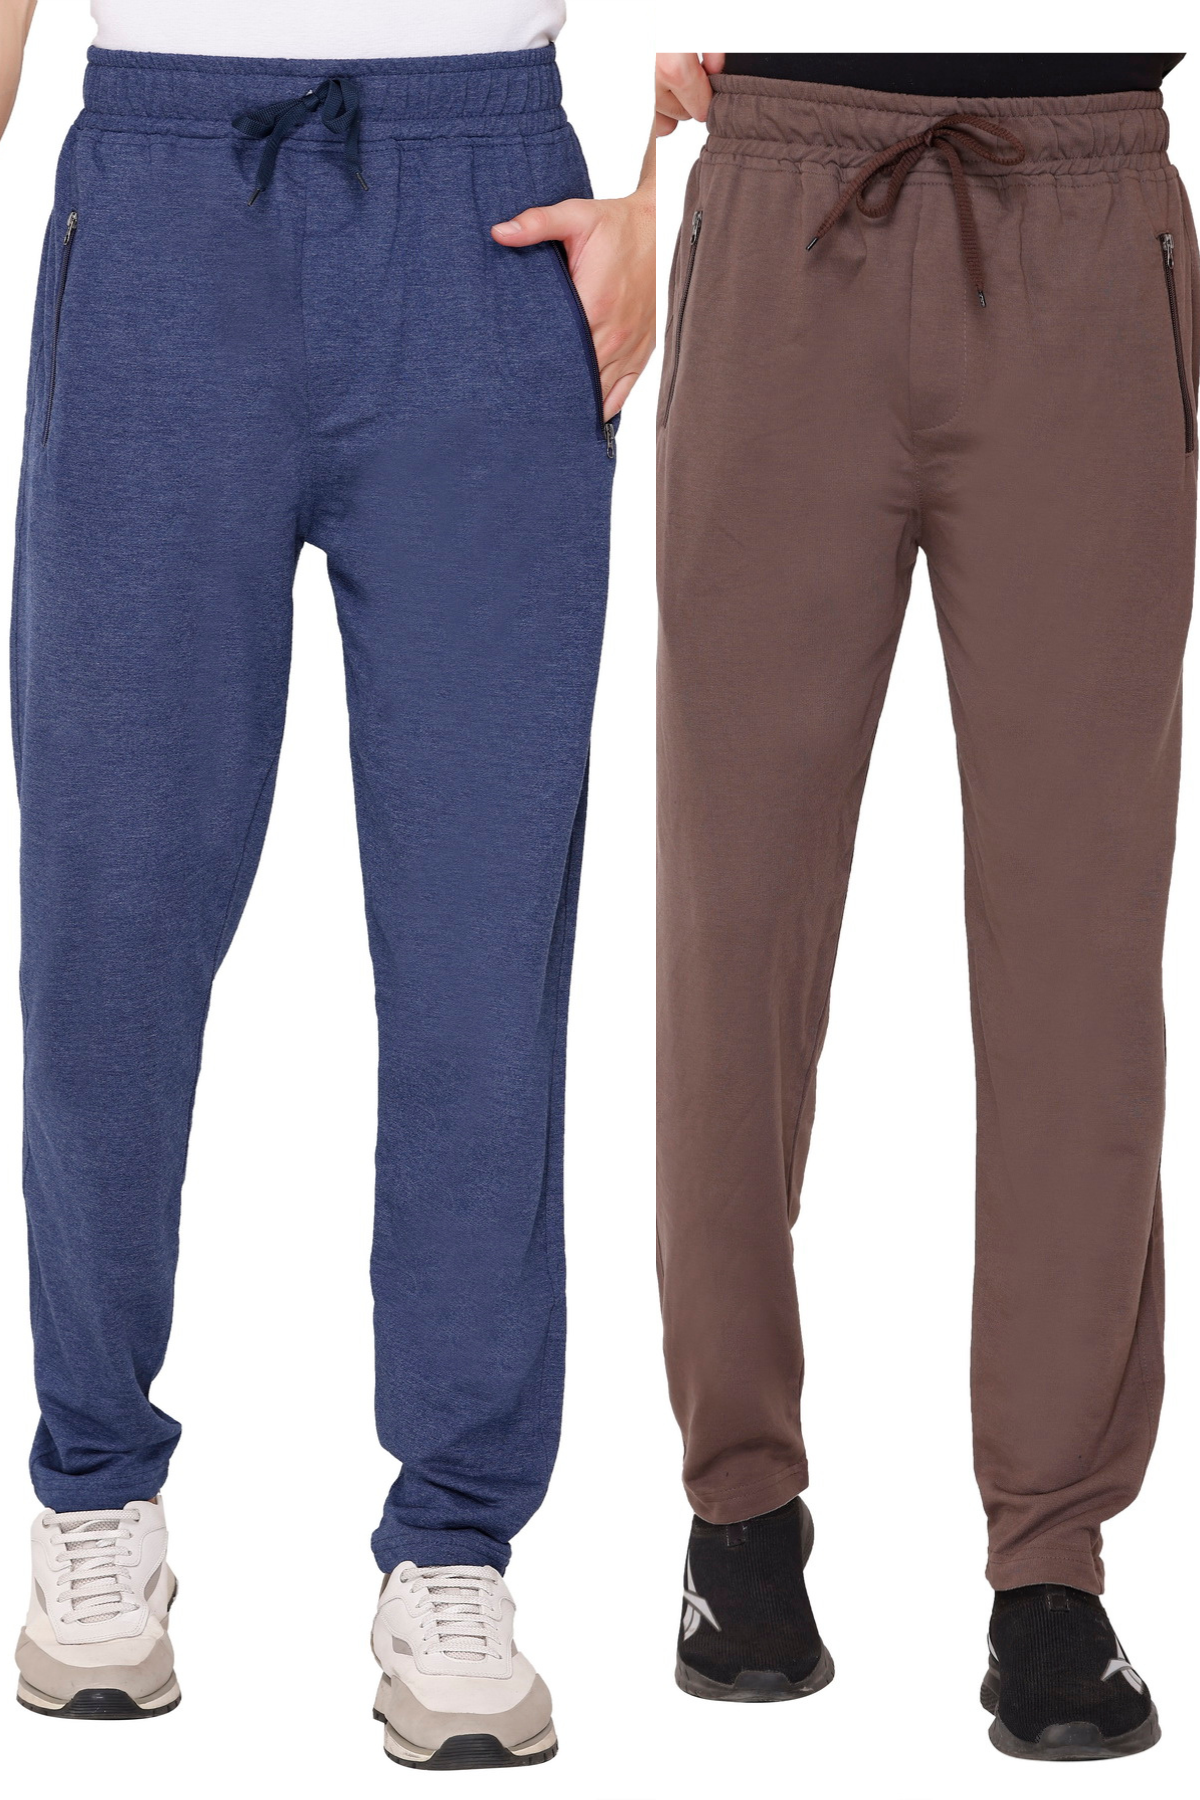 Buy Beige and Dark Gray Combo of 2 Men Pants Cotton for Best Price,  Reviews, Free Shipping